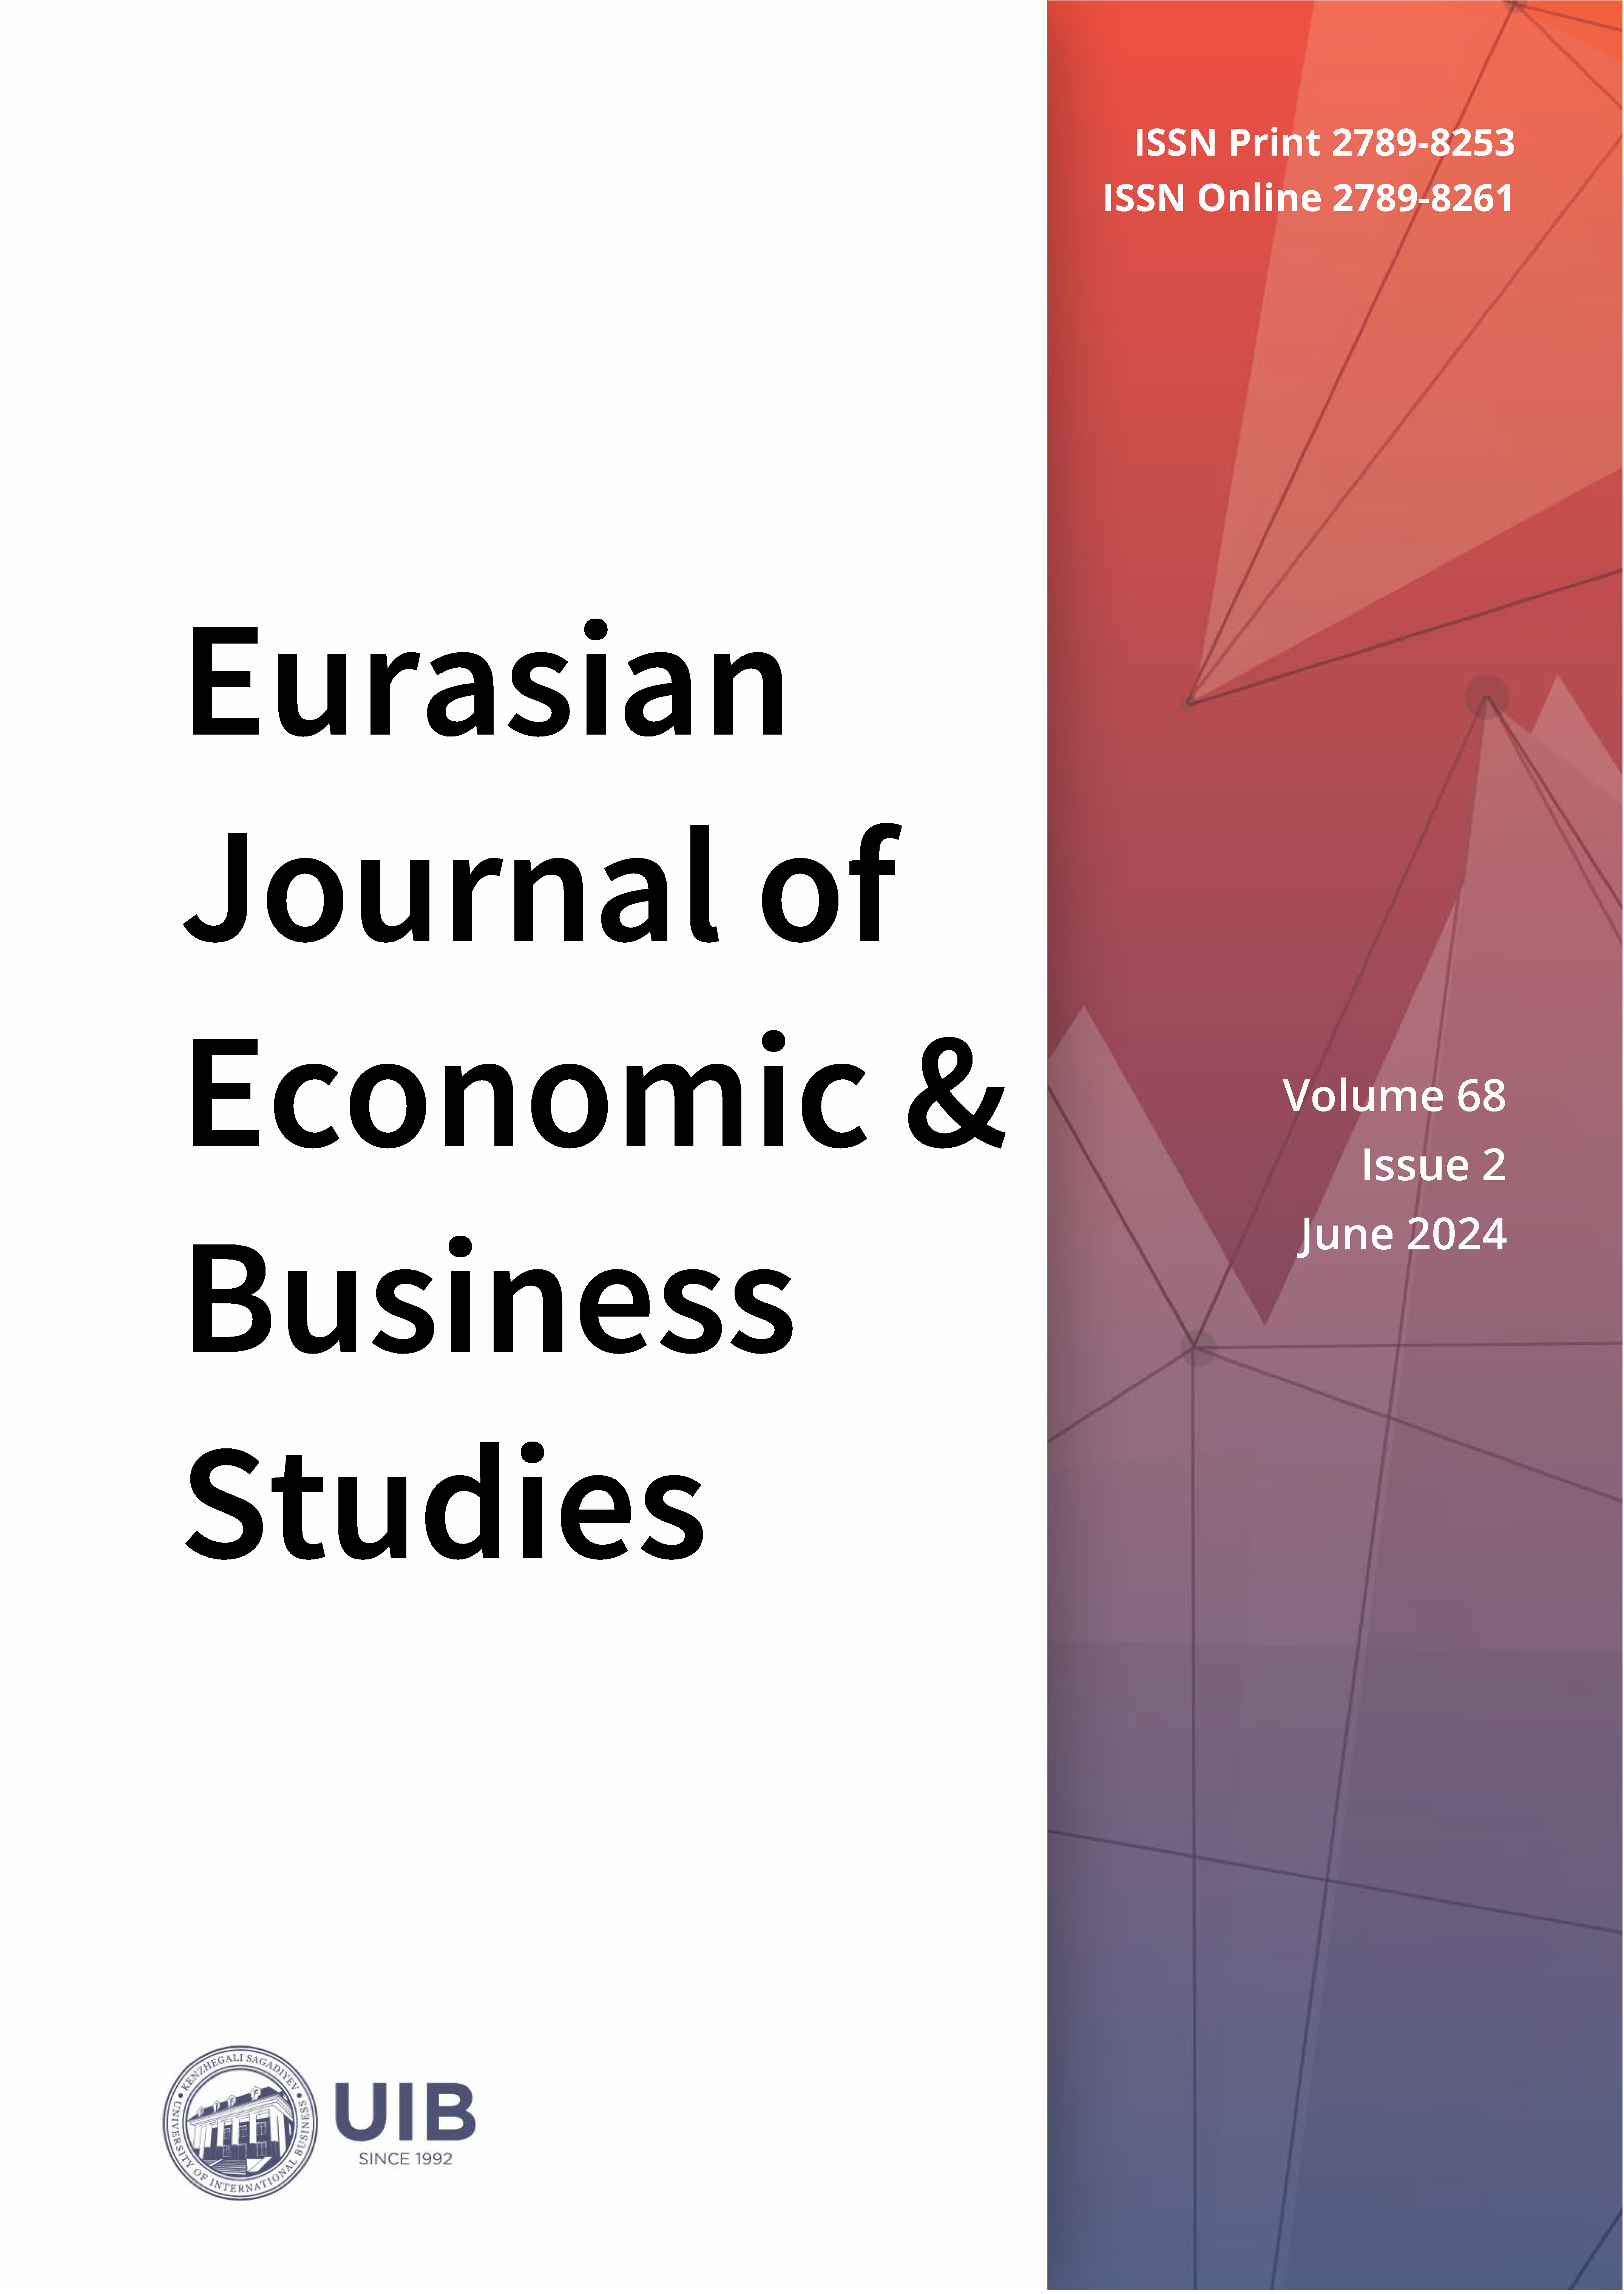 										View Vol. 68 Issue 2 (2024): Eurasian Journal of Economic and Business Studies
									